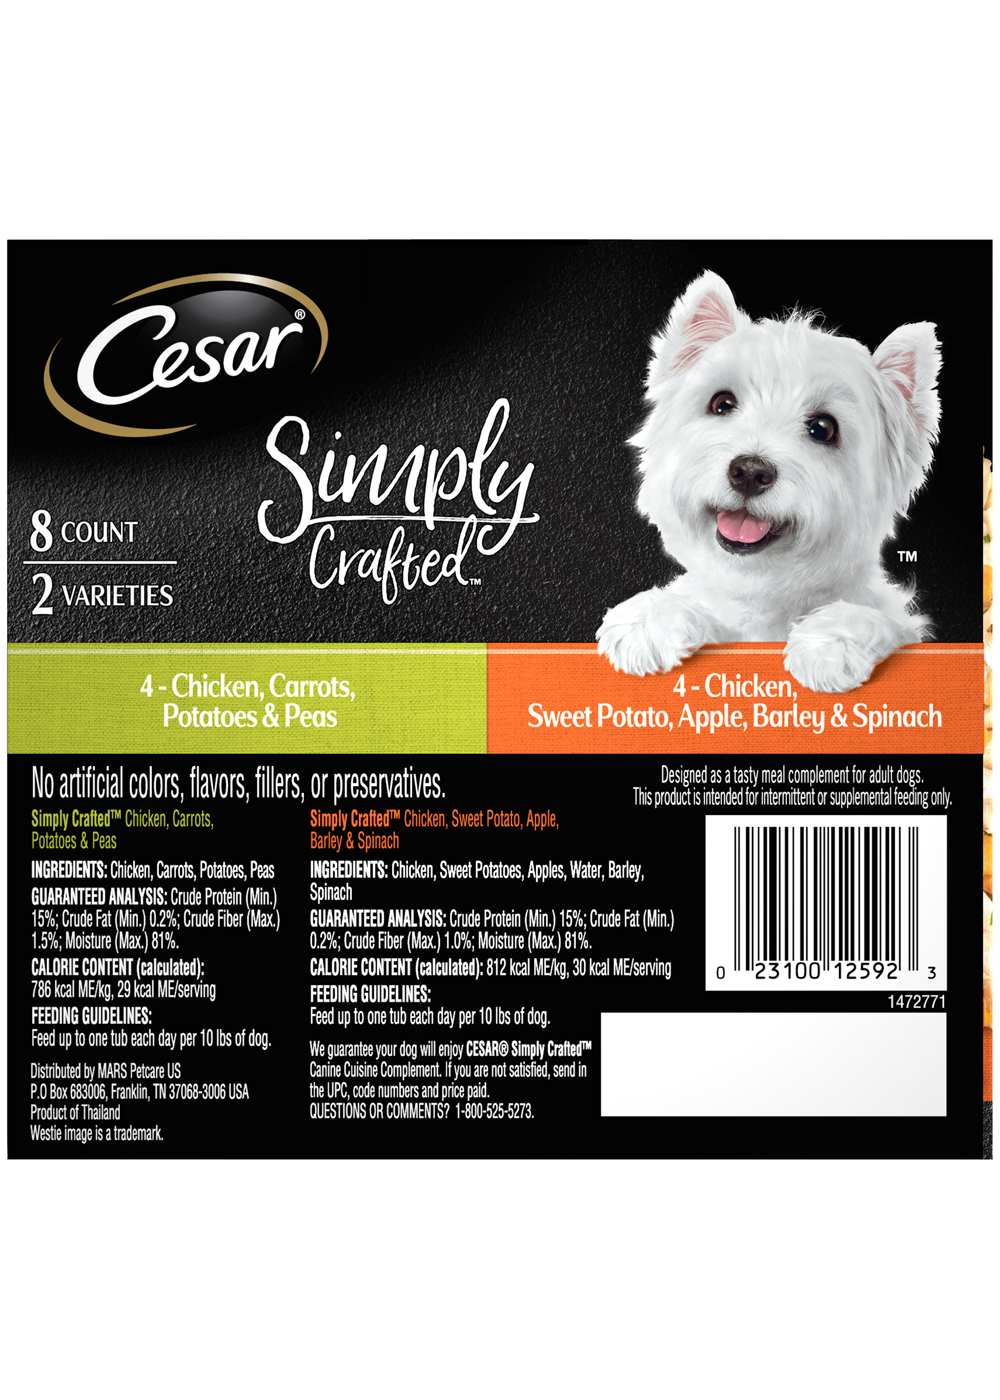 Cesar Simply Crafted Chicken Wet Dog Food Multipack; image 2 of 2